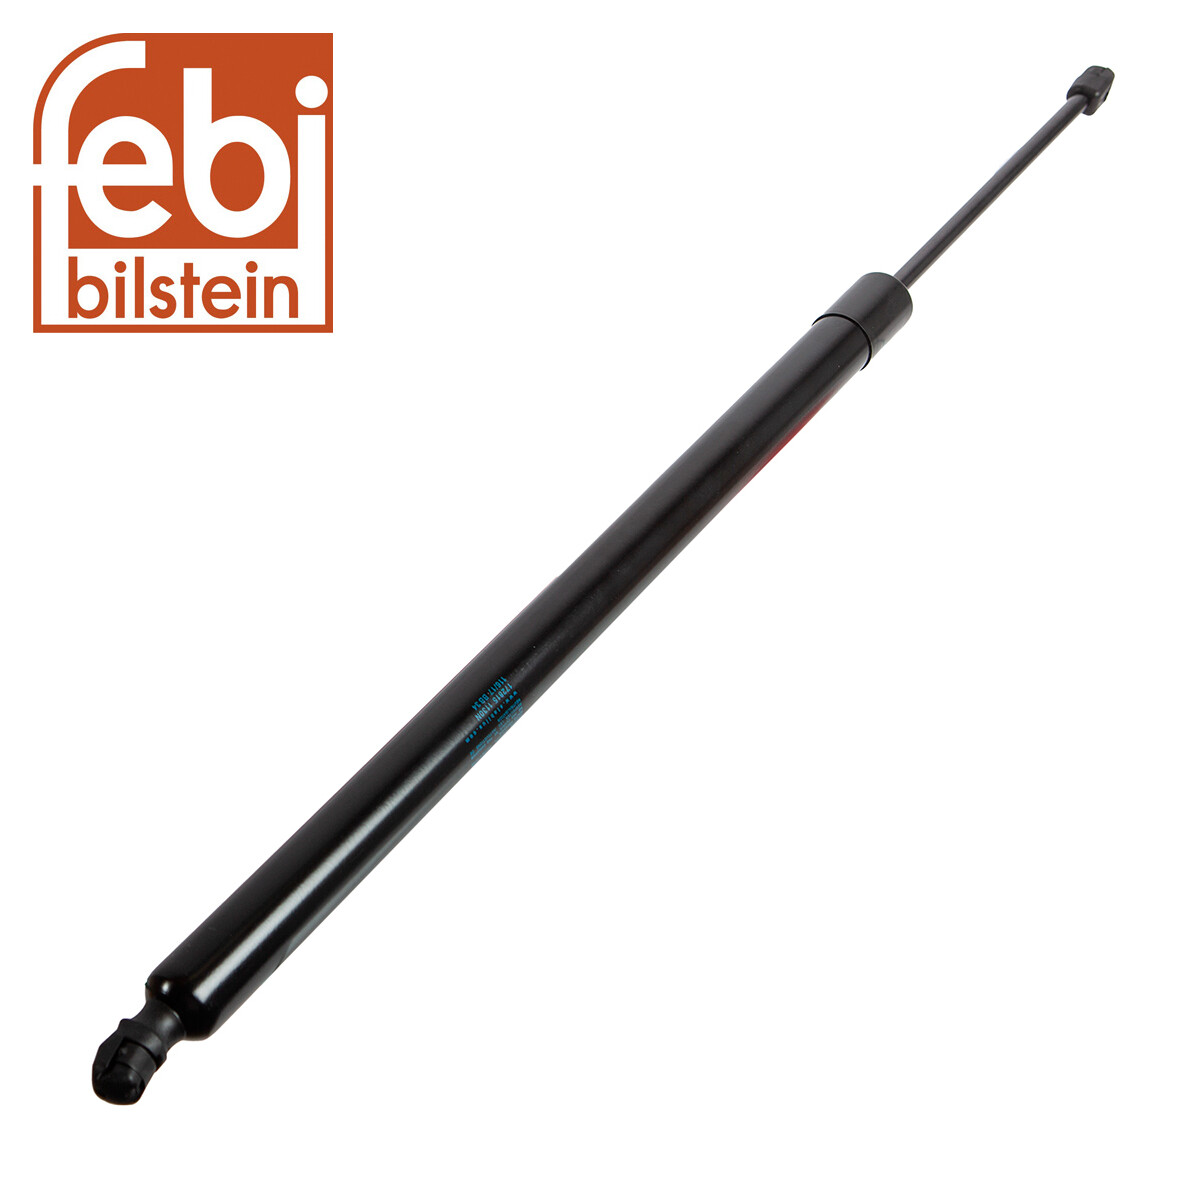 Febi Bonnet Gas Strut Spring Genuine OE Quality Replacement Lifter